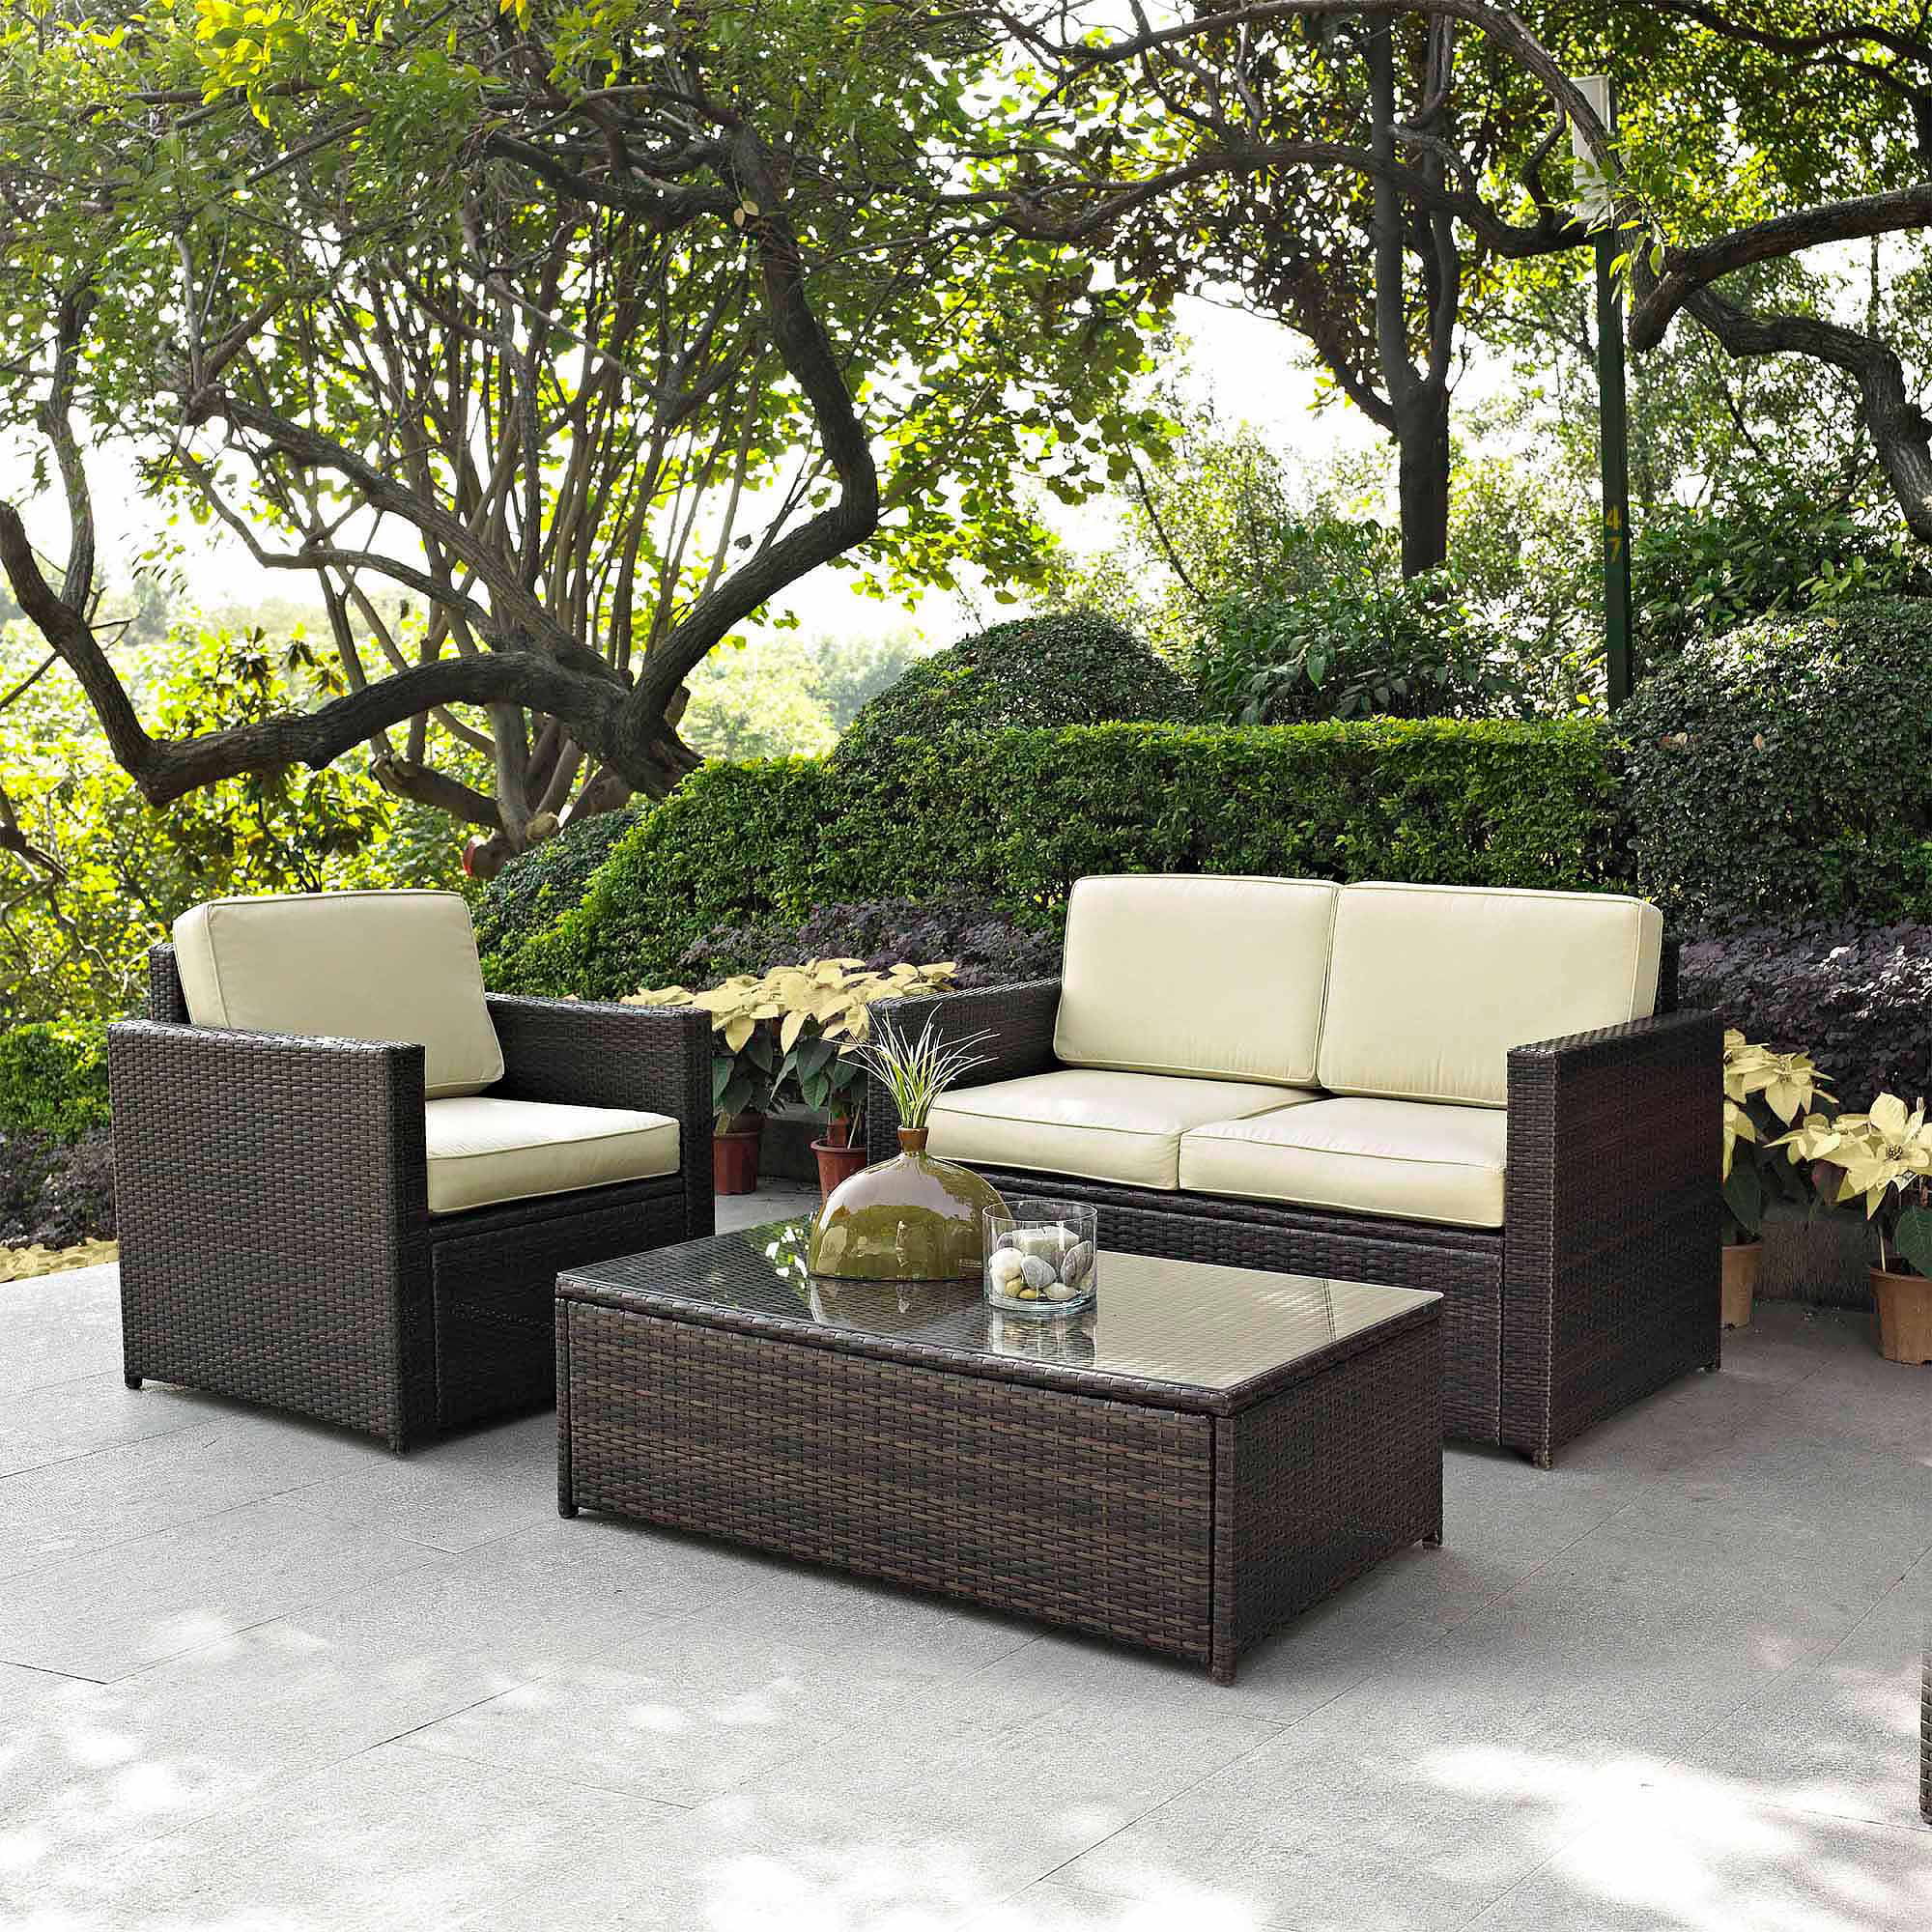 Crosley Furniture Palm Harbor 3 Piece Outdoor Wicker Seating Set